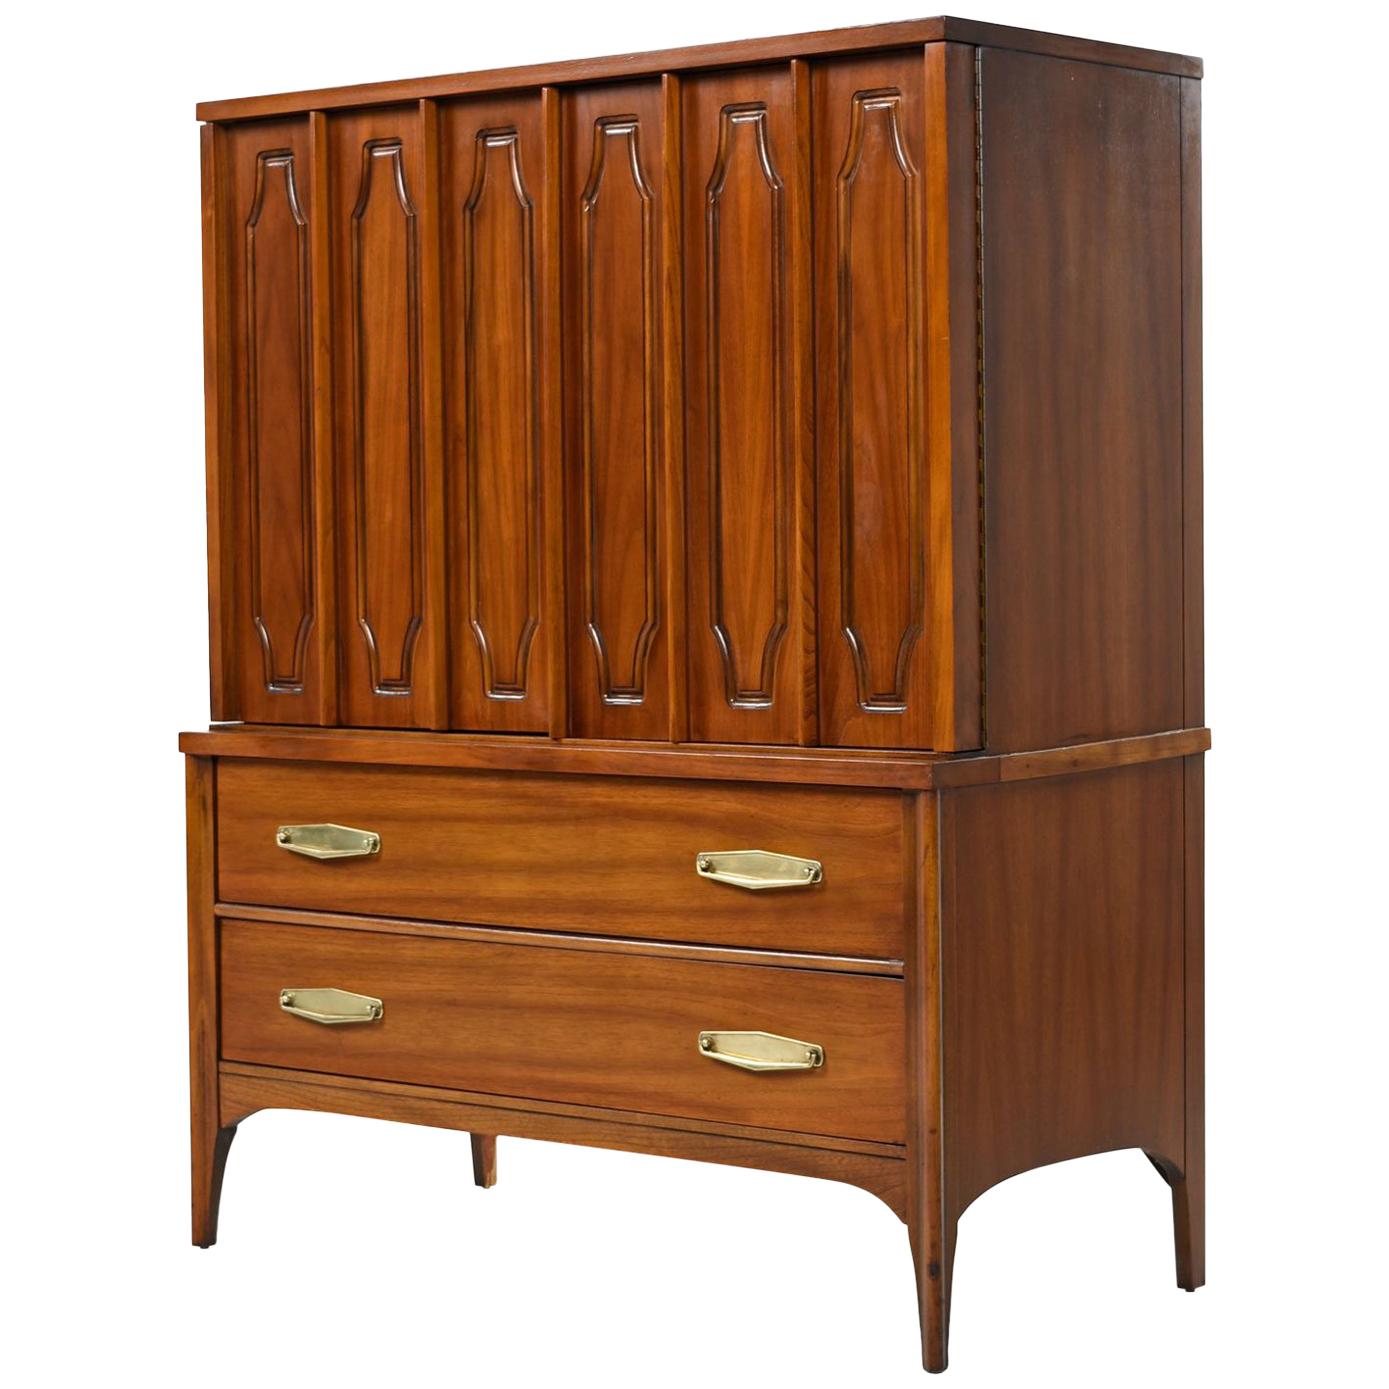 This gorgeous gentleman's dresser created by Kent Coffey for the Marquee Modern line boasts a beautiful finish that celebrates its walnut grain. The top portion features two cabinet doors that open up to three large drawers for storage. Below are